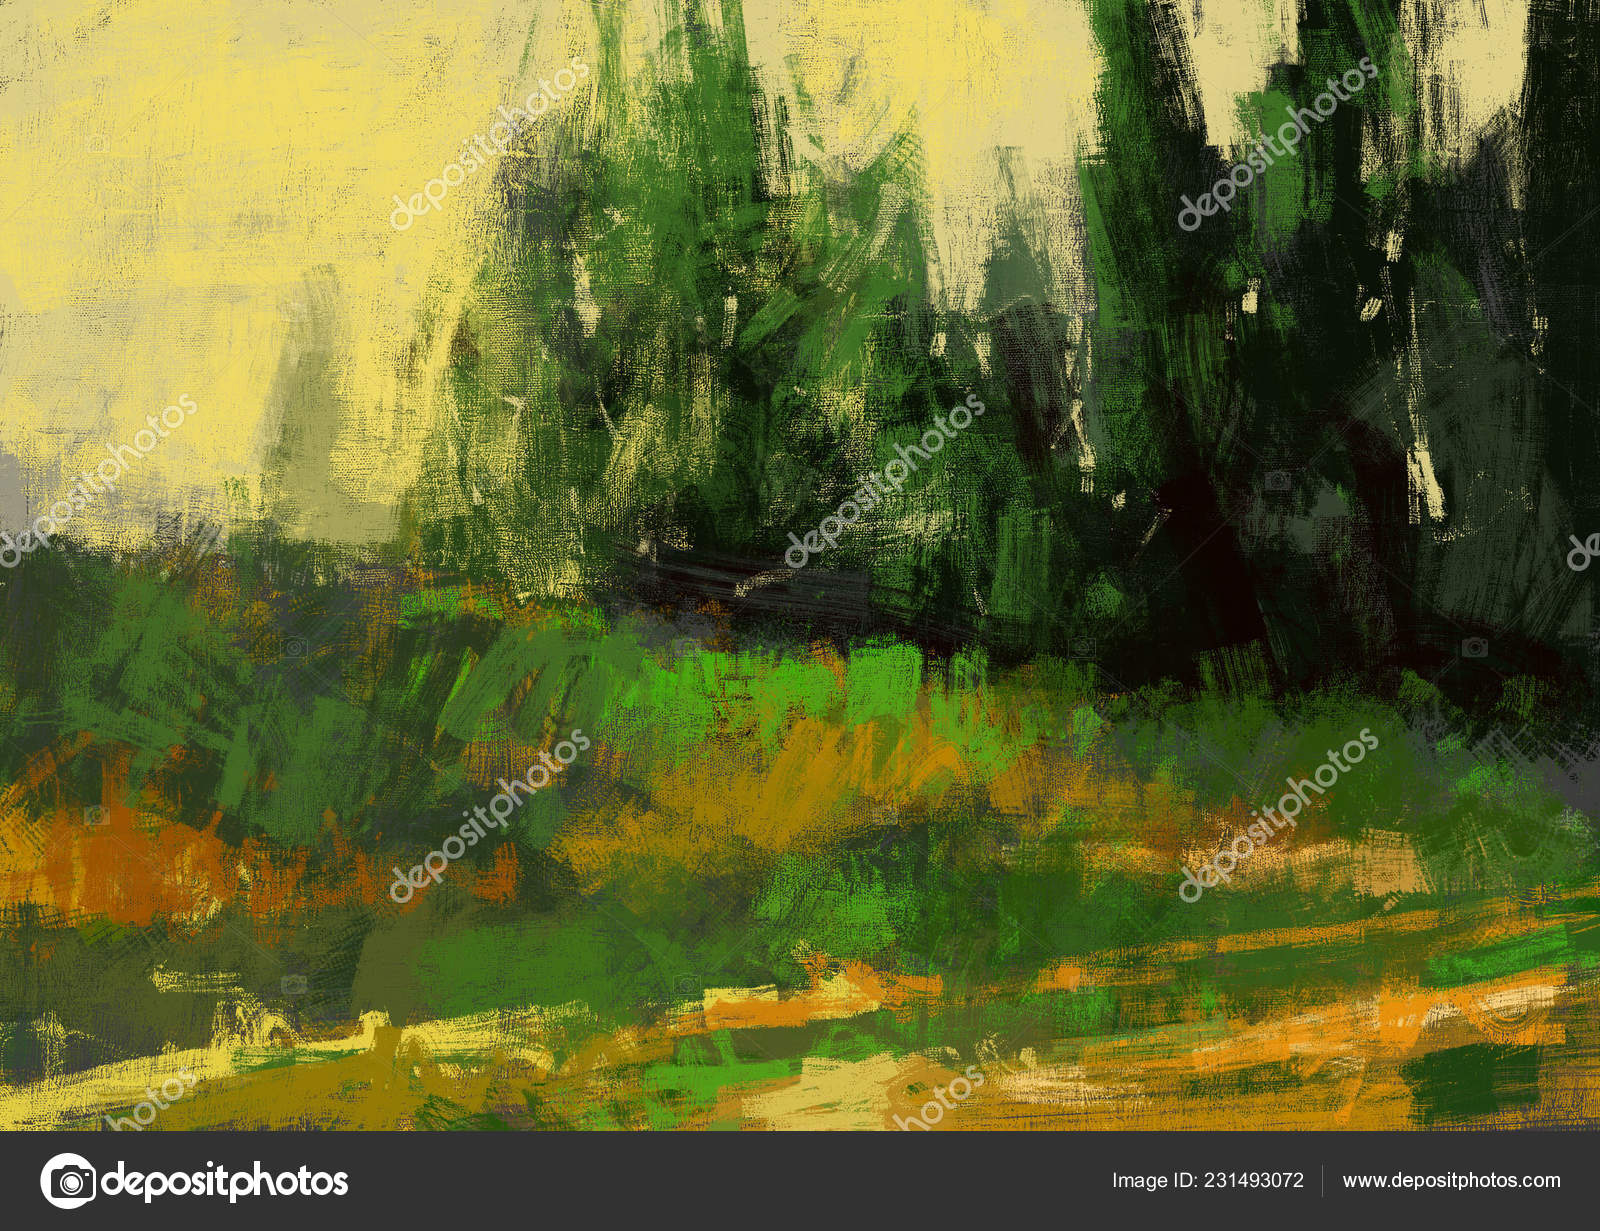 Painting Abstract Nature Brush Stroke Style Art Stock by ©Christianmullerart 231493072